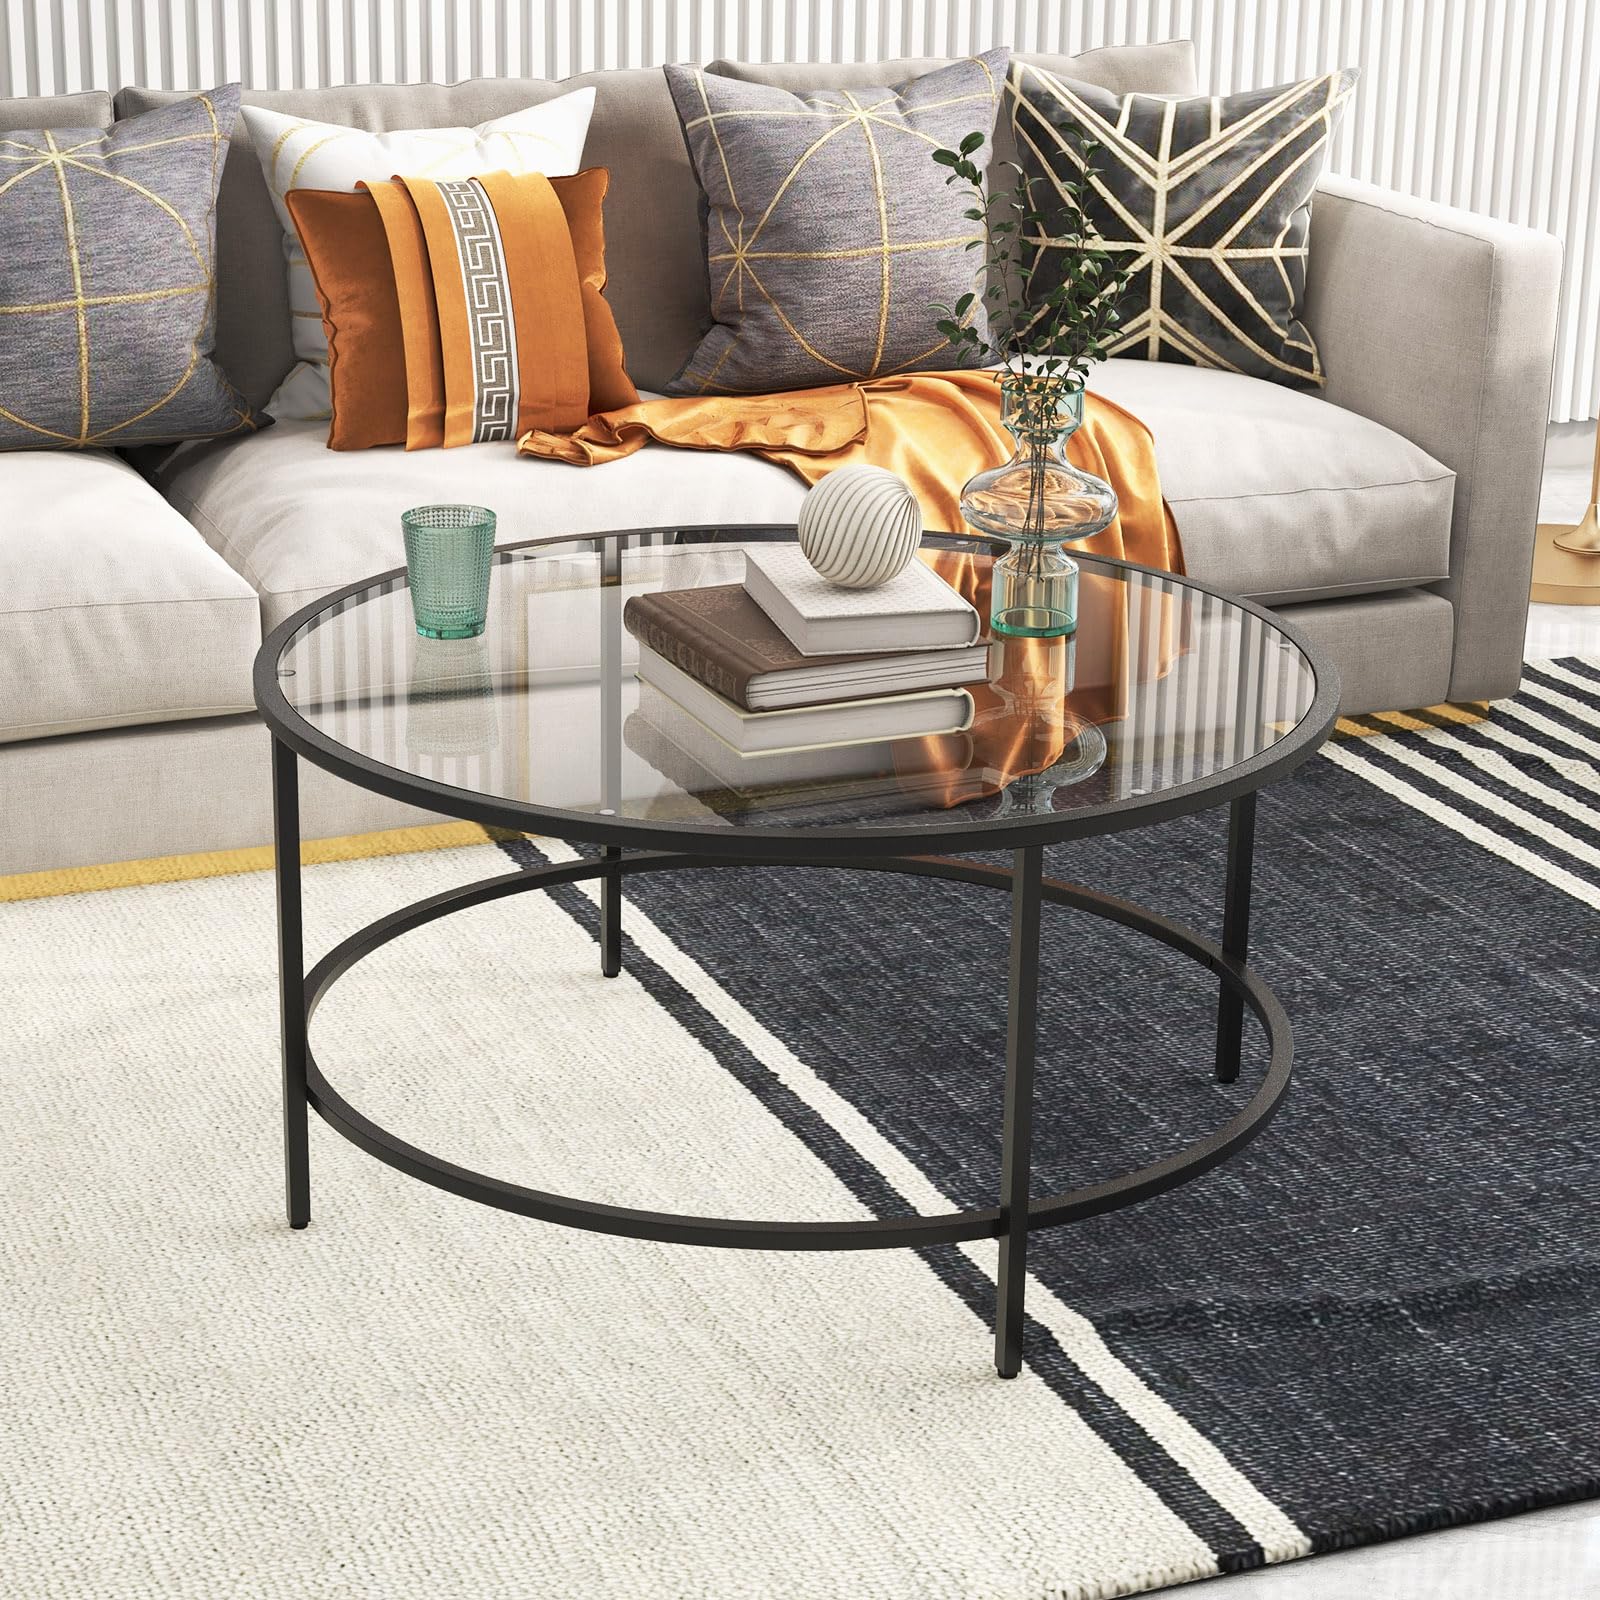 Giantex 35.5”D Round Coffee Table - Modern Coffee Table with Tempered Glass Tabletop